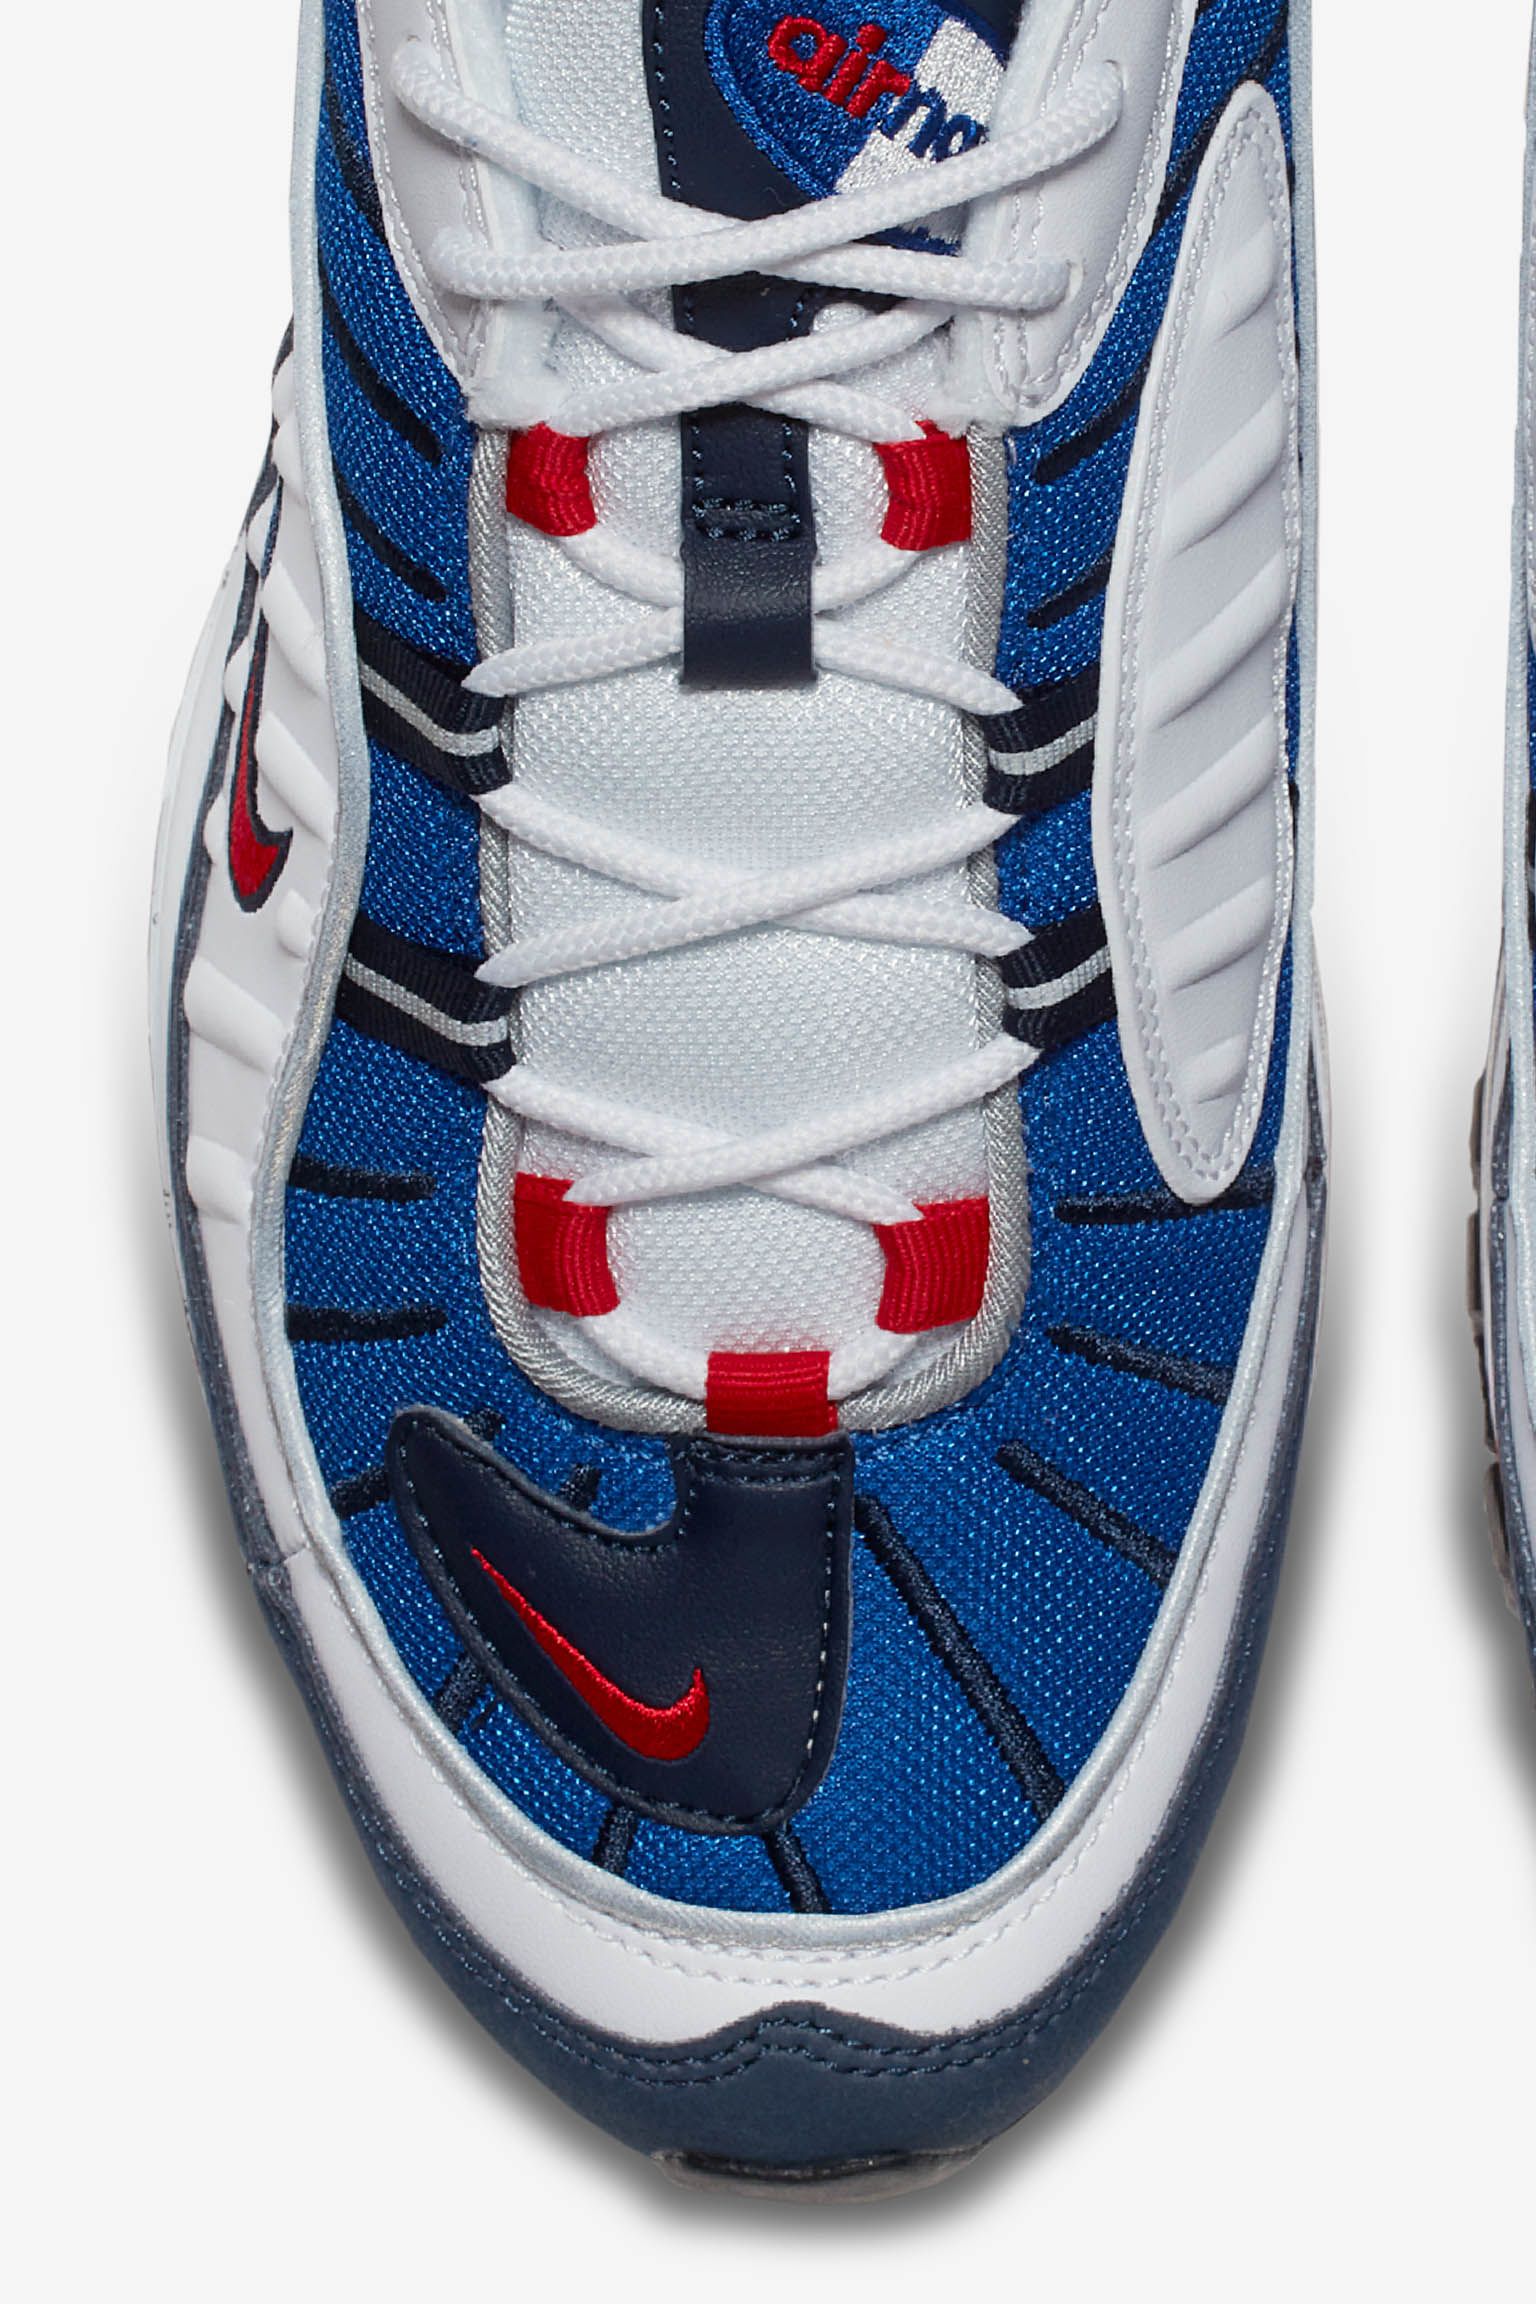 Nike Air Max 98 'White & University Red & Royal Blue' Release Date ...